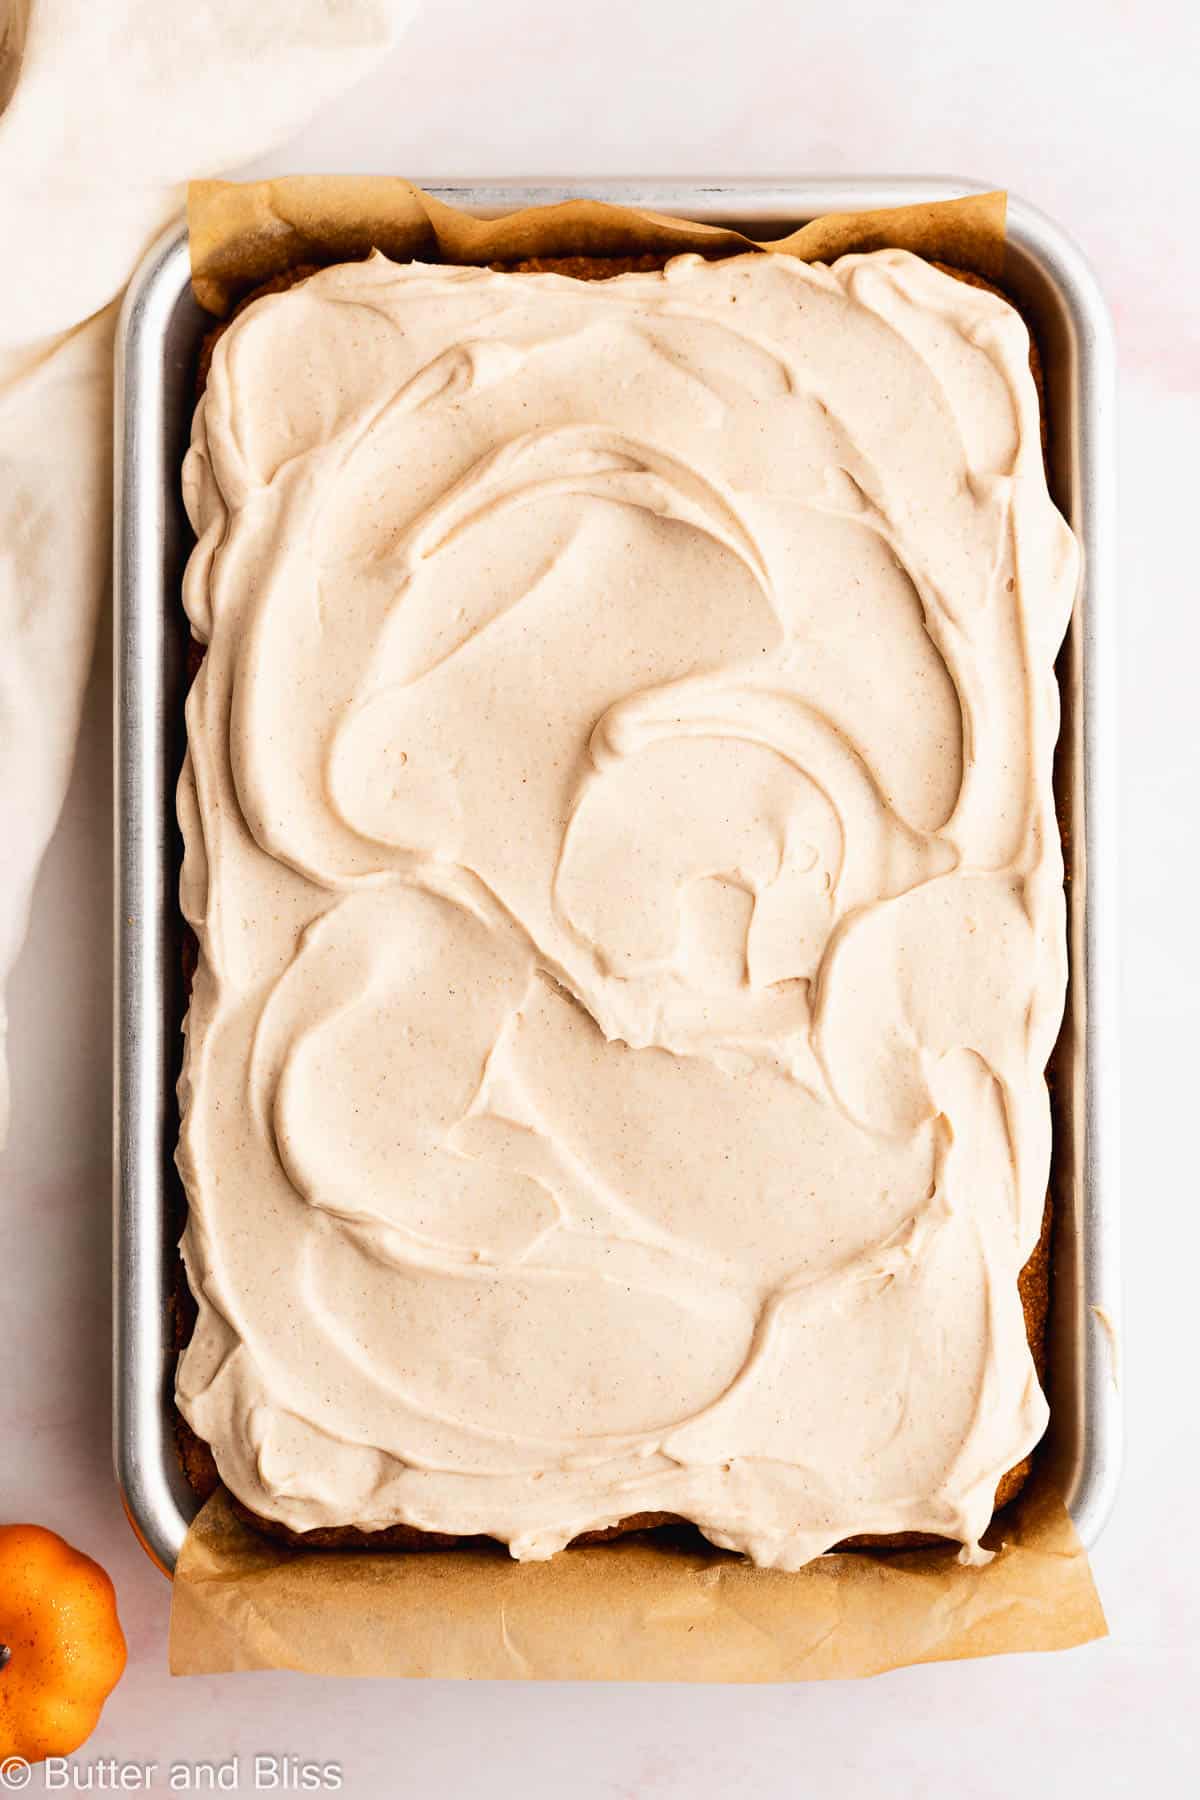 Cream cheese frosting on top of freshly baked fall treats in a baking pan.